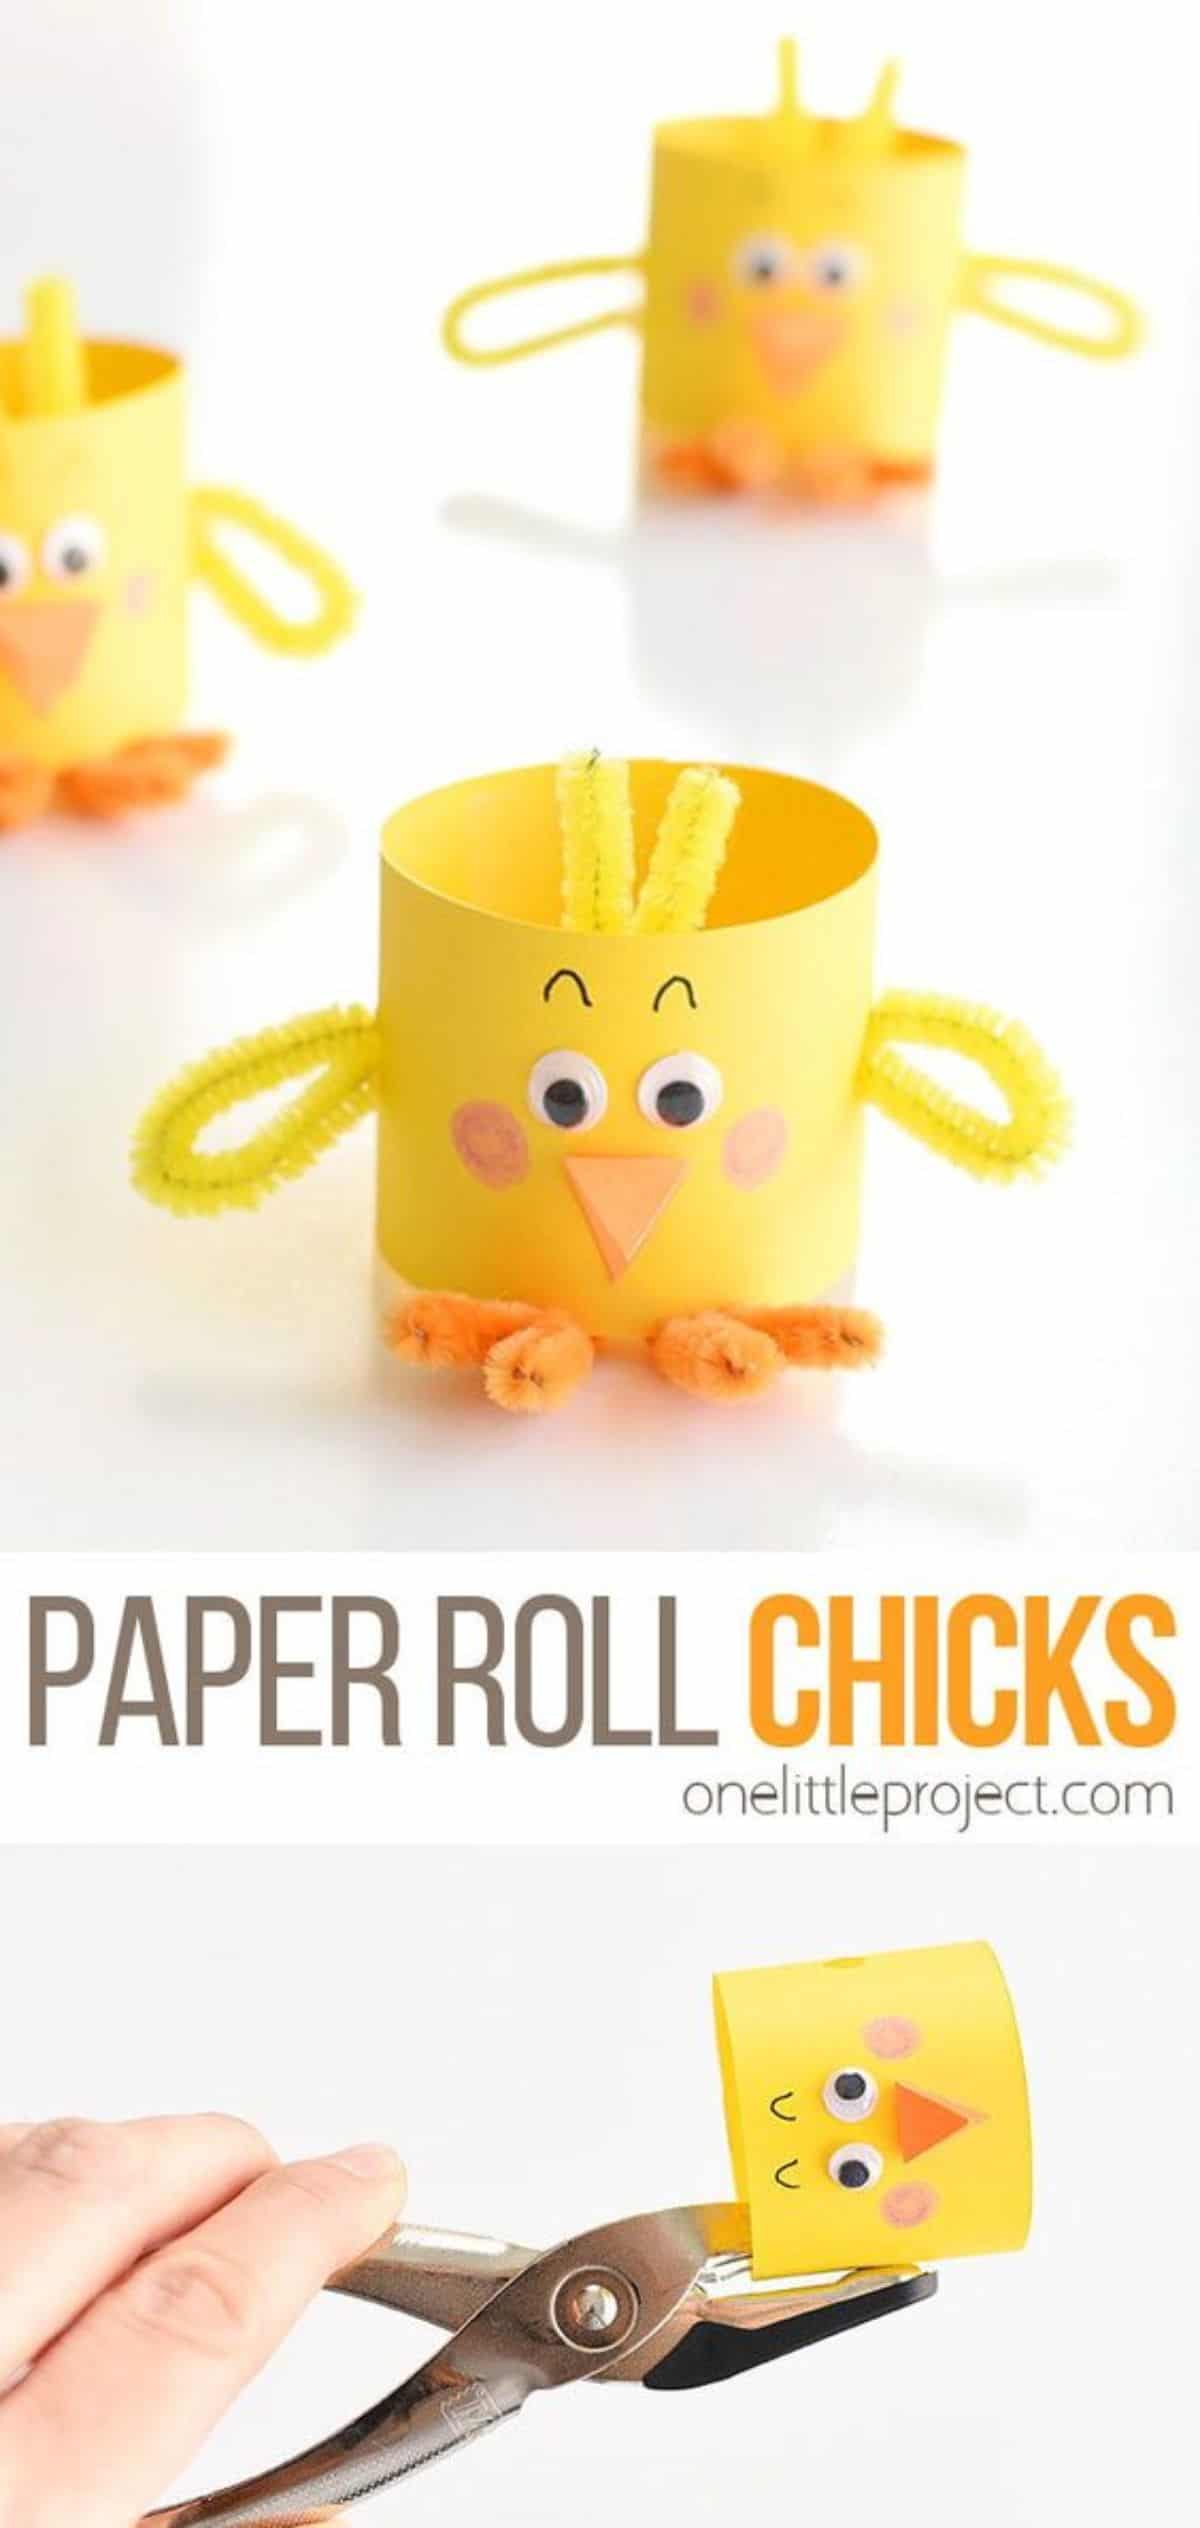 yellow chick decorations made out of paper rolls. Underneath a step in the making process